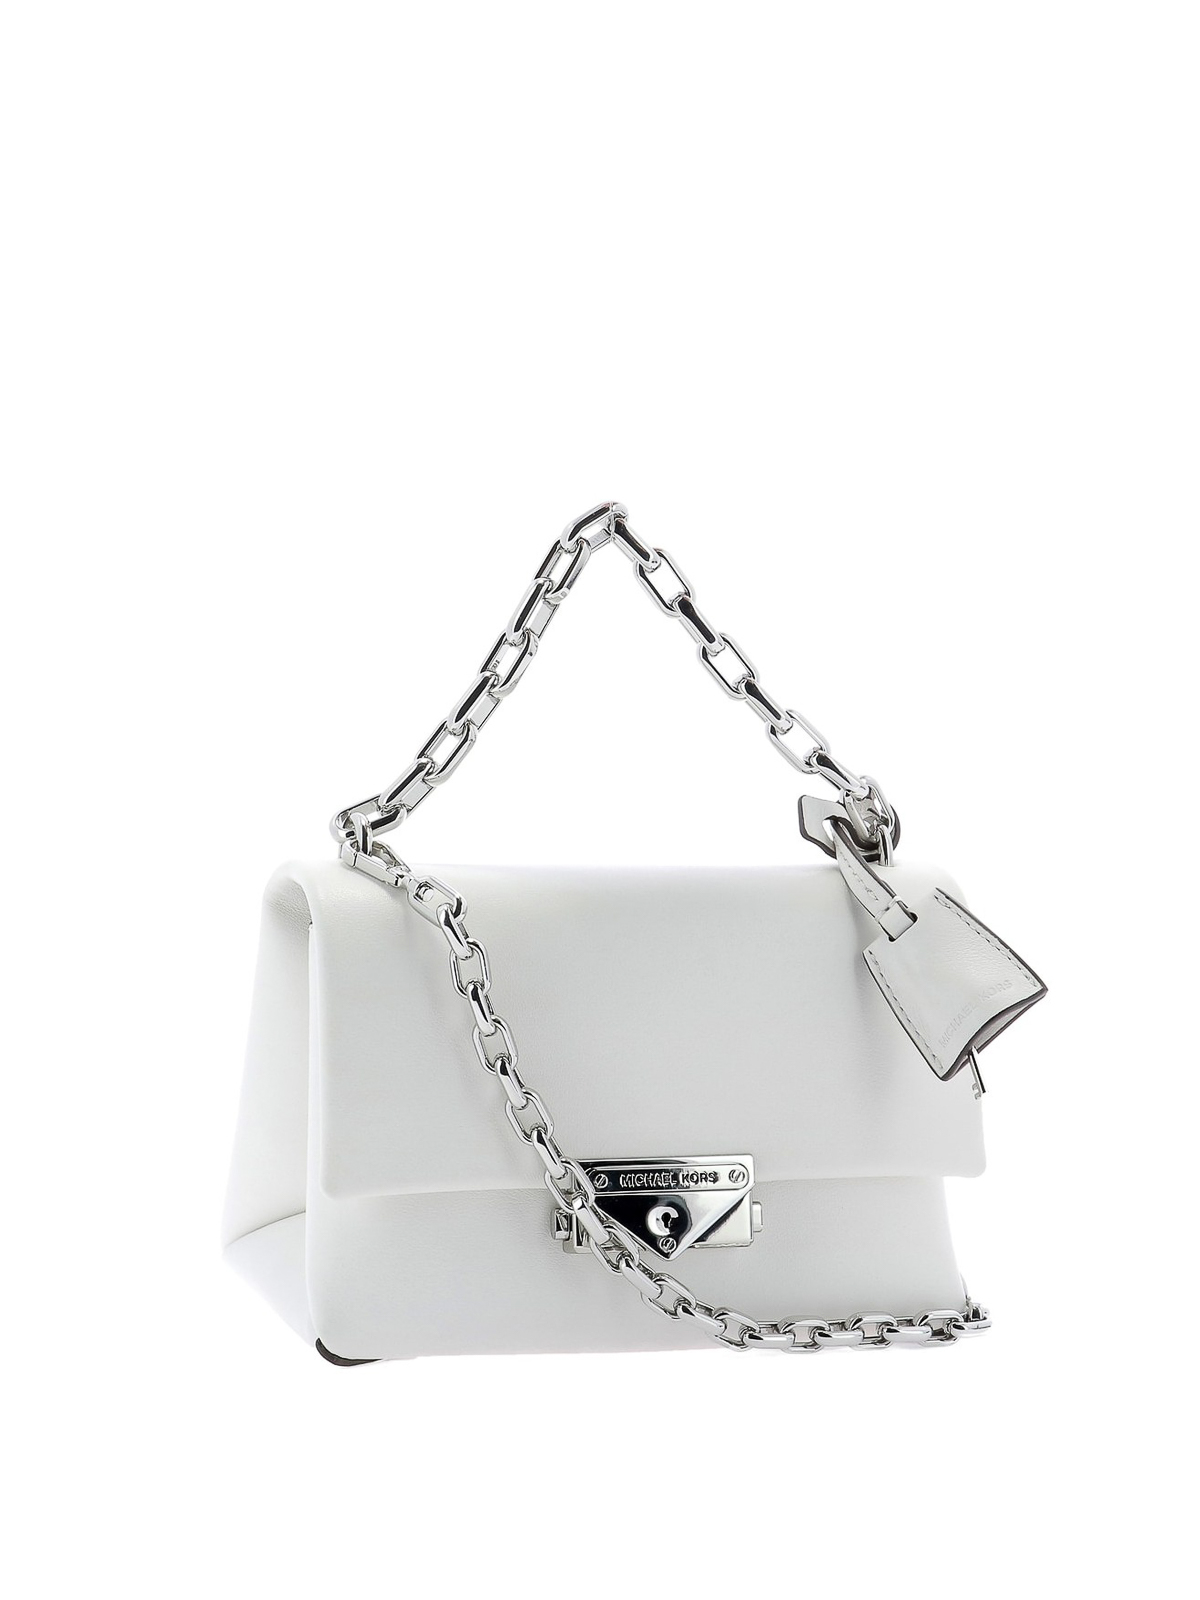 Shoulder bags Michael Kors - Cece XS white smooth leather bag ...